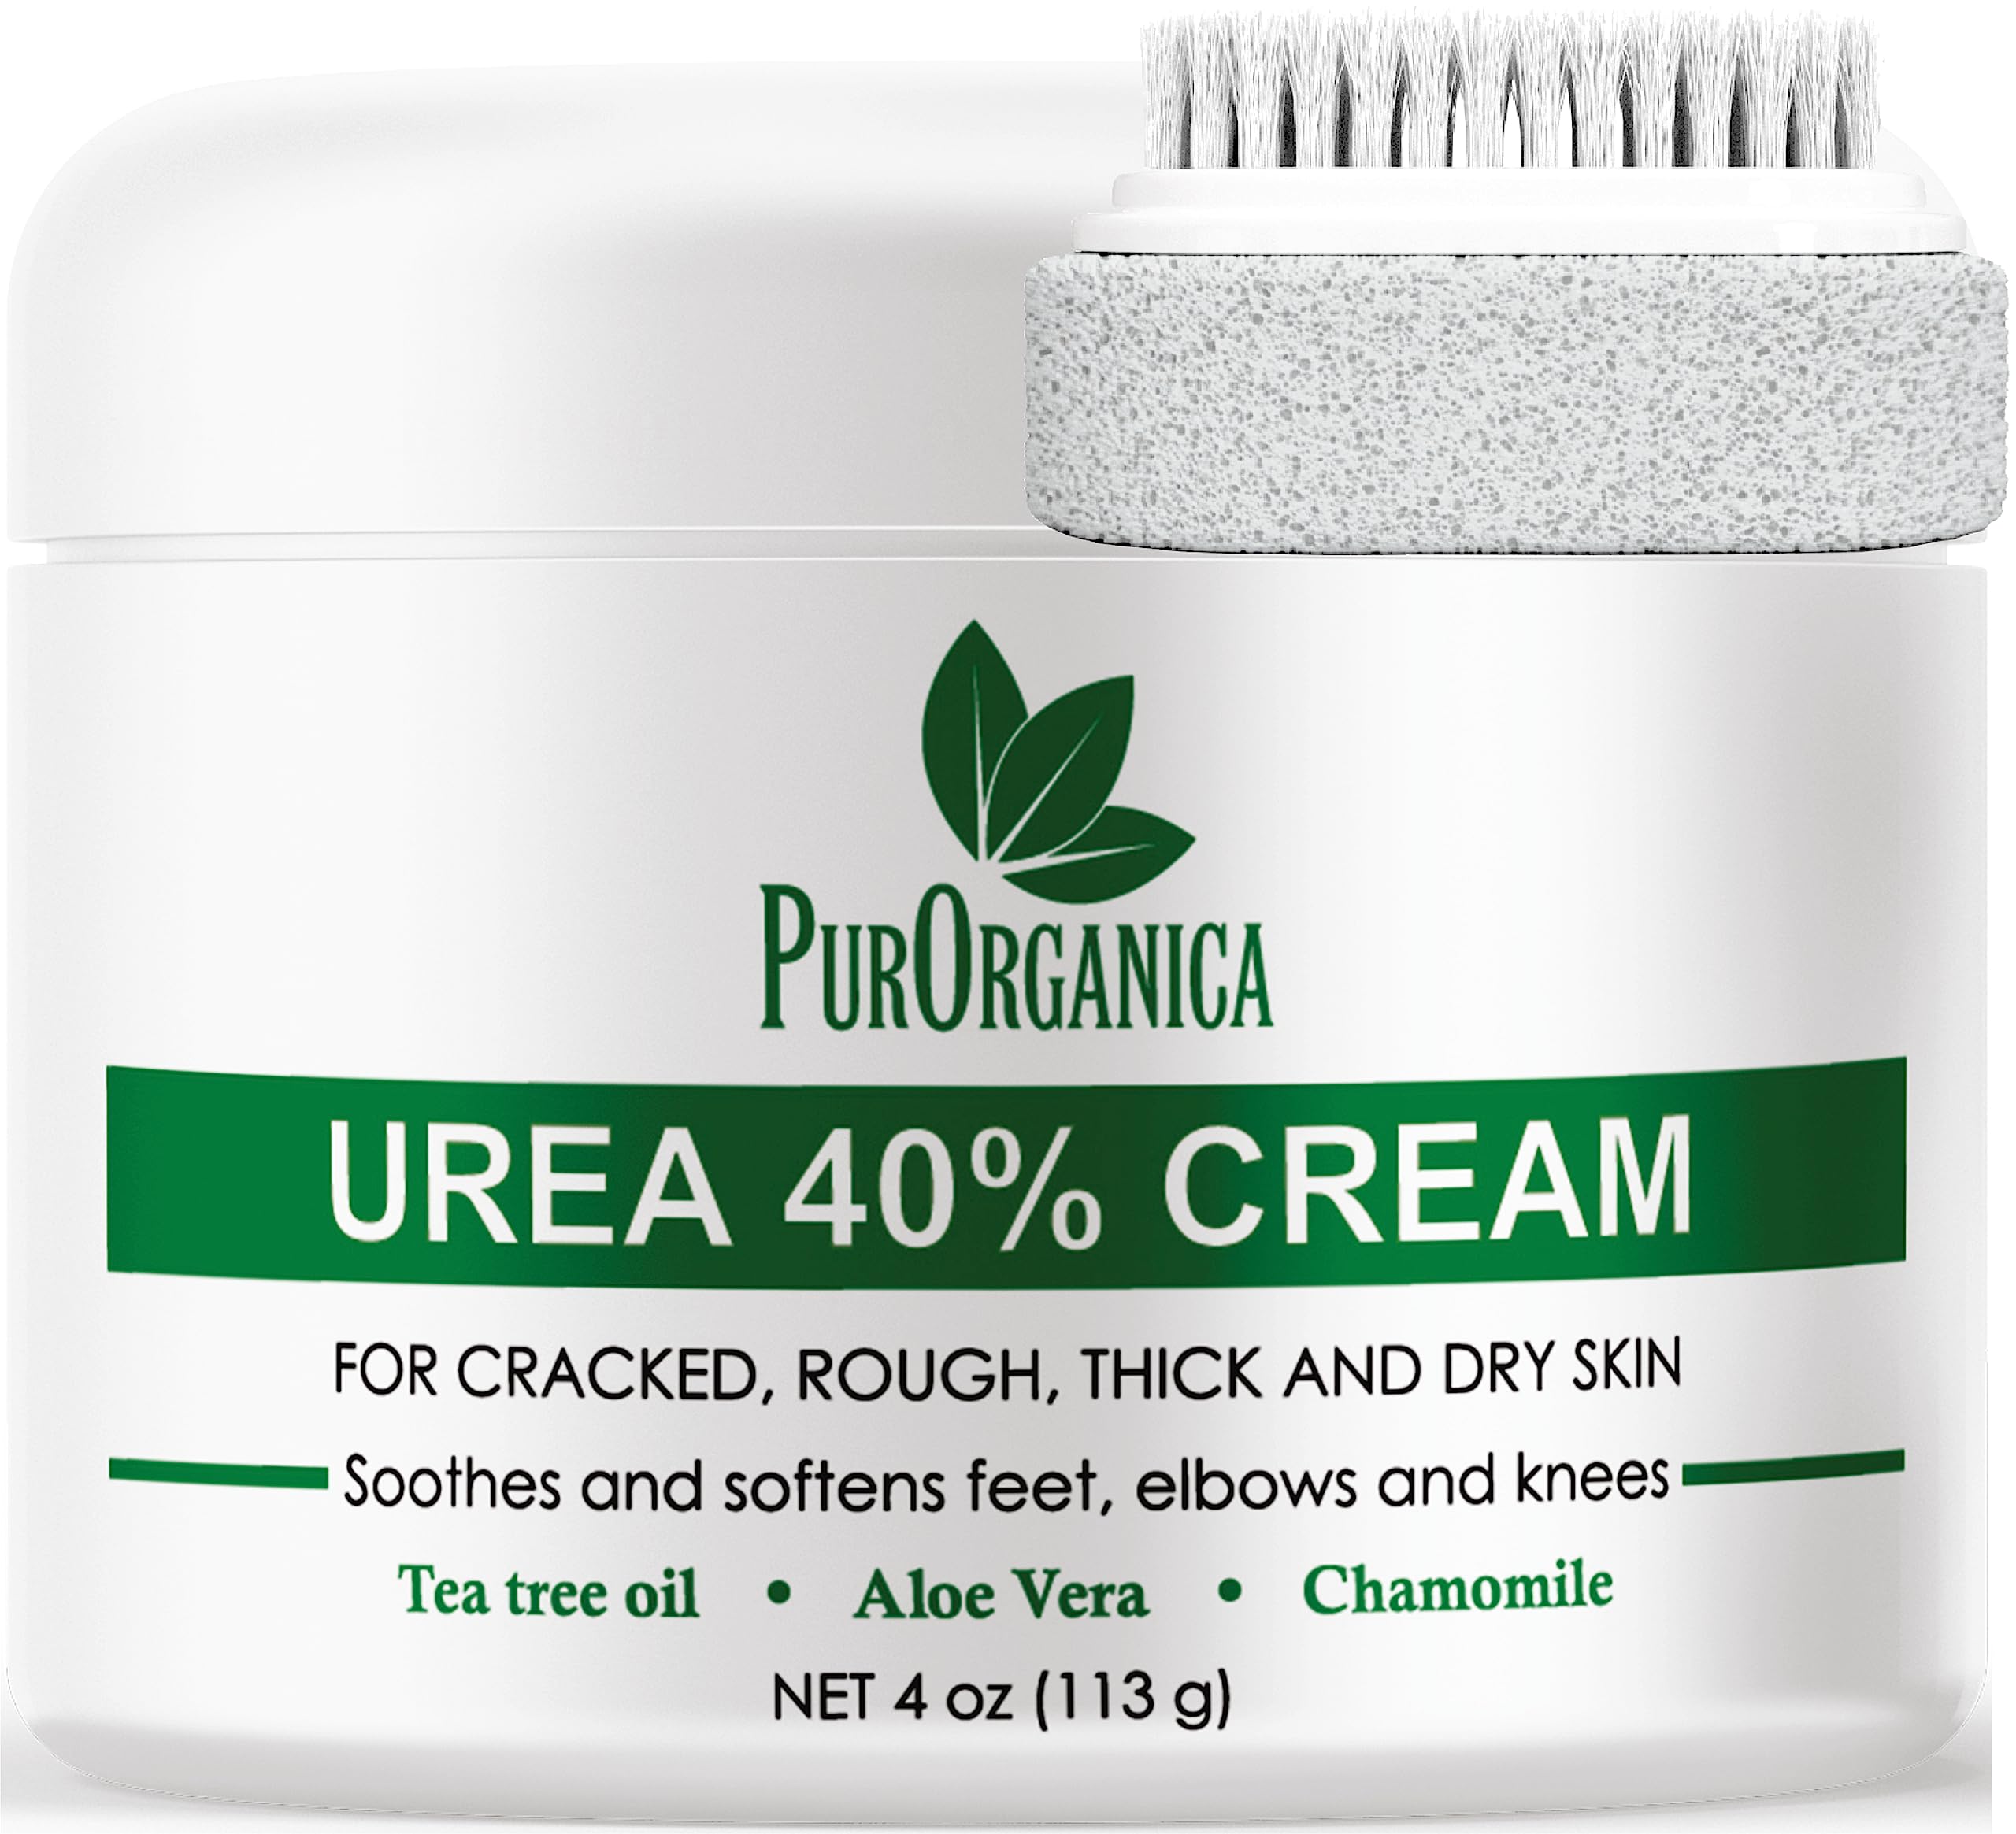 PurOrganica Urea 40% Foot Cream - With Pumice Stone and Brush - Callus Remover - Moisturizes & Rehydrates Thick, Cracked, Rough, Dead & Dry Skin - For Feet, Elbows and Hands - Made in USA